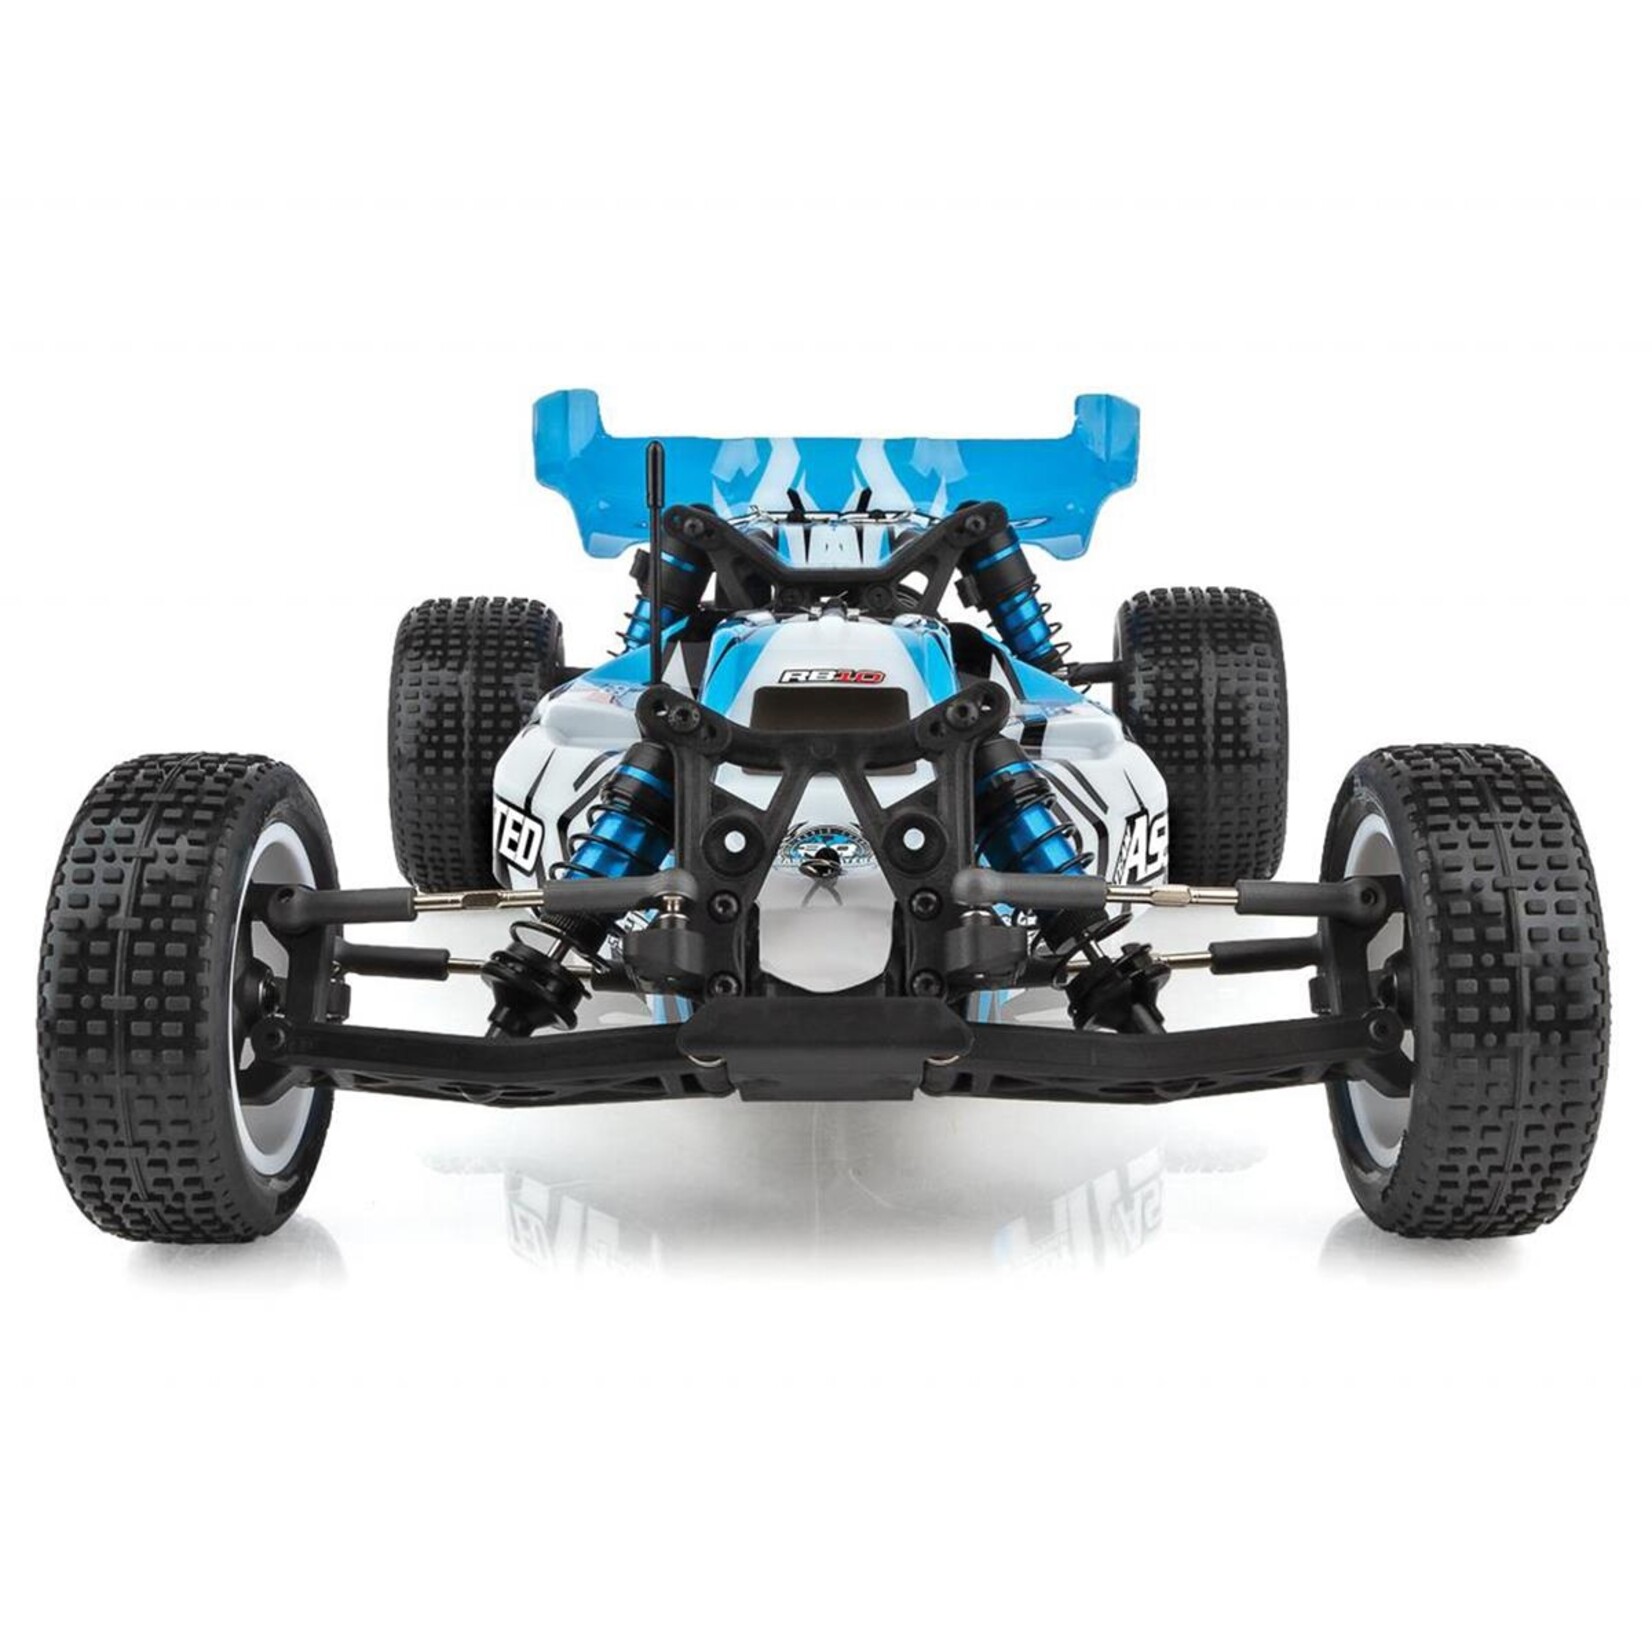 Team Associated Team Associated RB10 RTR 1/10 Electric 2WD Brushless Buggy Combo (Blue) w/2.4GHz Radio, DVC & Battery & Charger #90031C